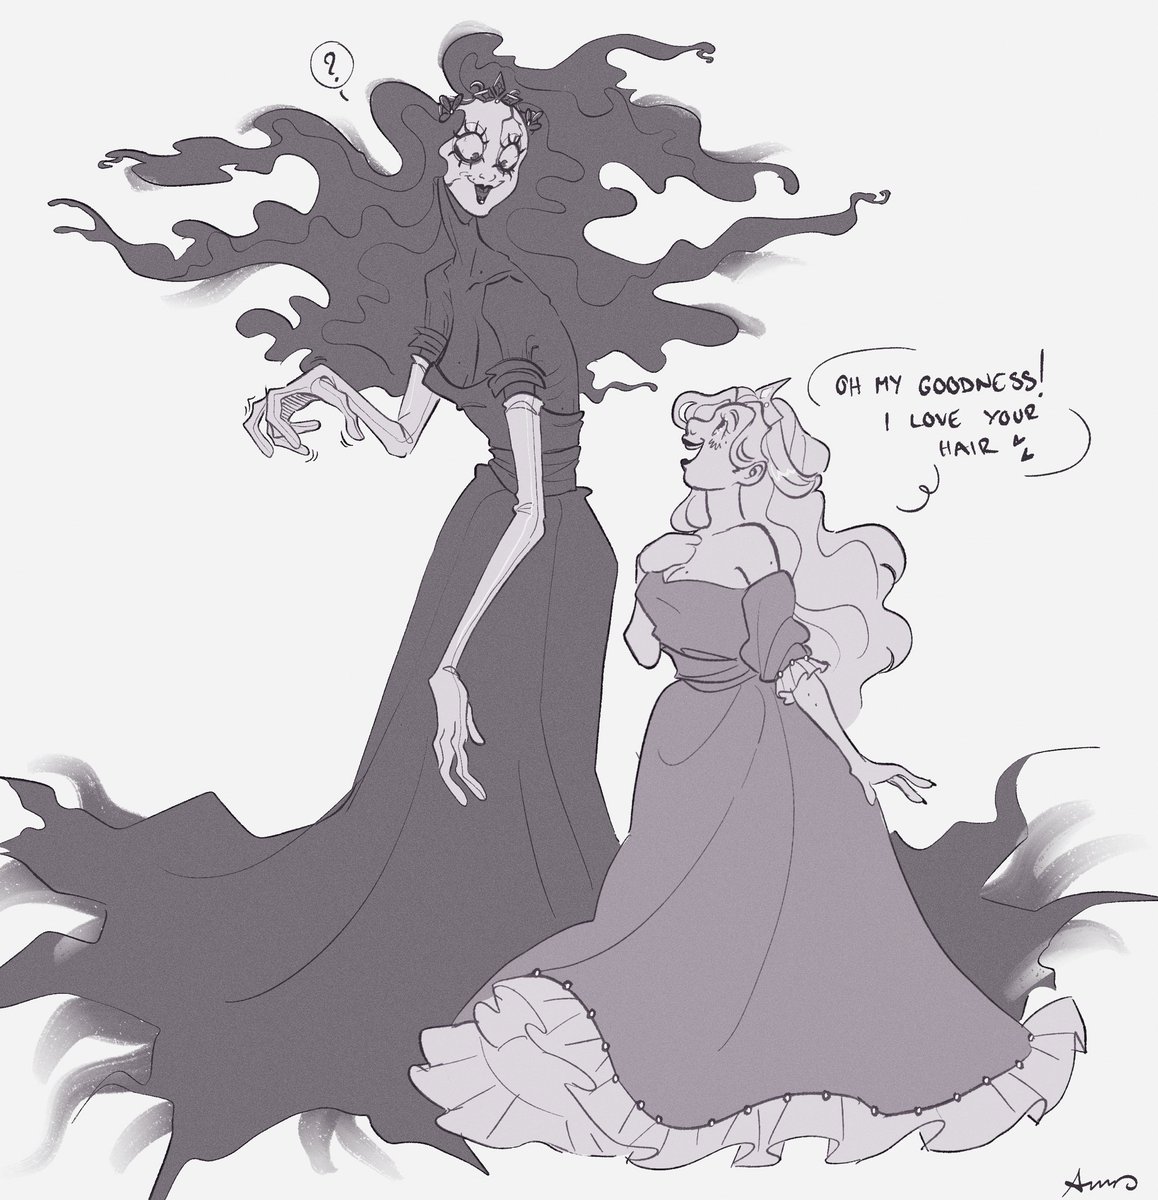 DAY 20 of drawing The Princess every day until The Pristine Cut comes out!

Nightmare and Damsel hanging out <33

#slaytheprincess #thenightmare #thedamsel